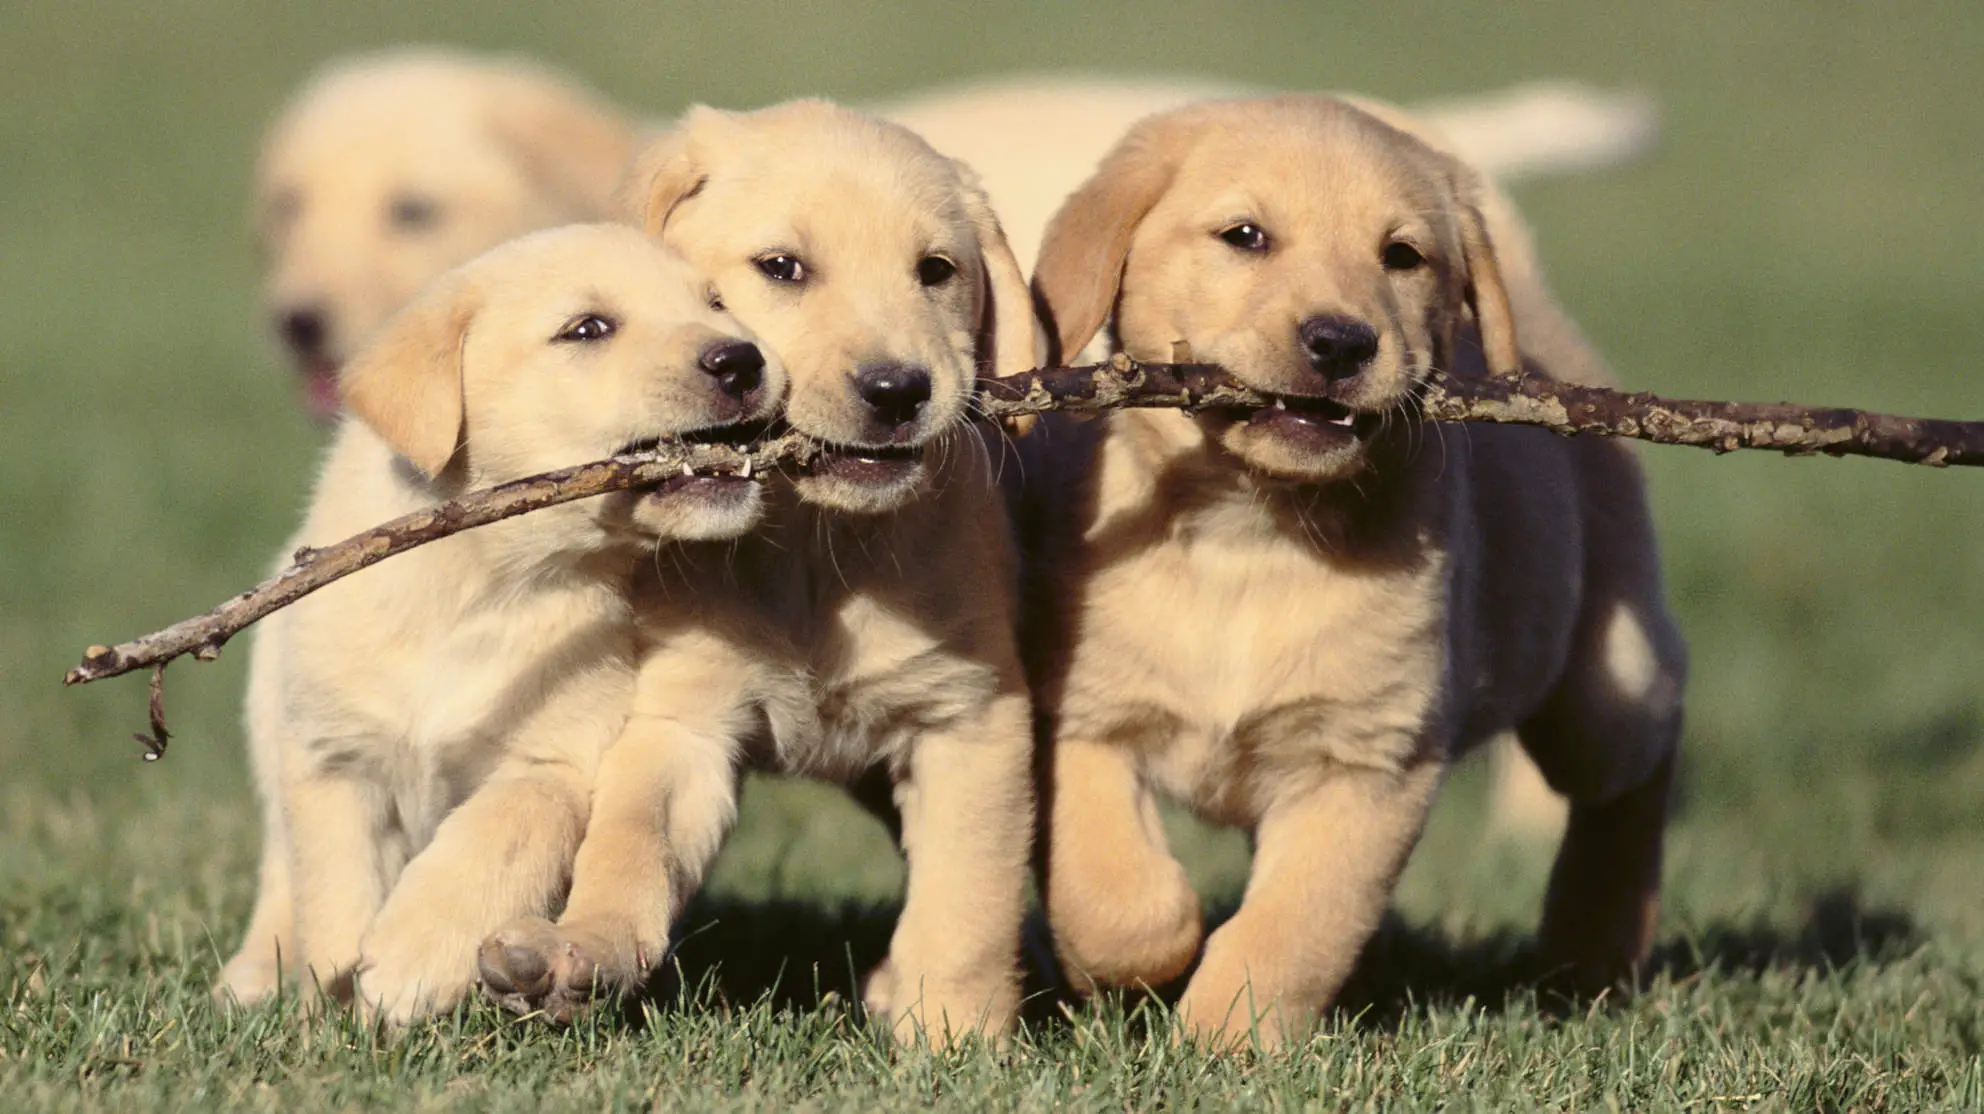 Puppies Fighting for a Stick